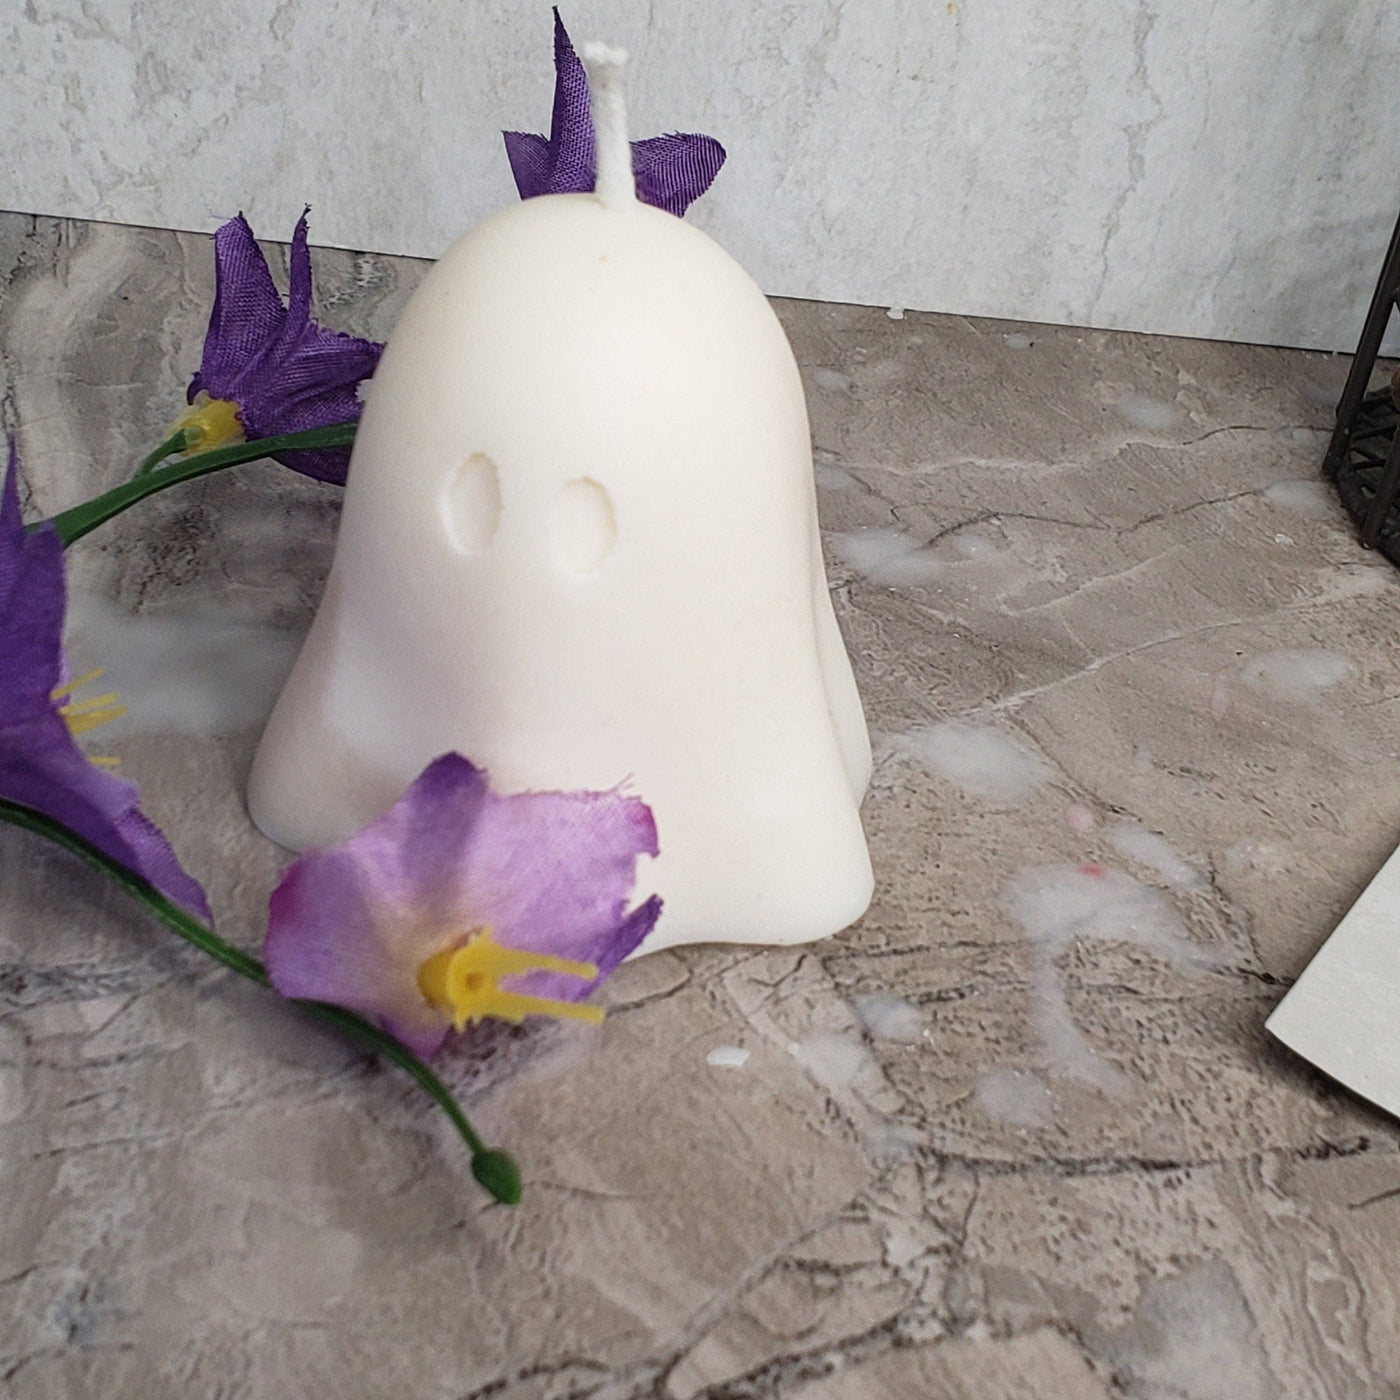 Soy Wax Ghost Candle, Soy Candle, Halloween Candle, Scented: Caffe Mocha / Brown